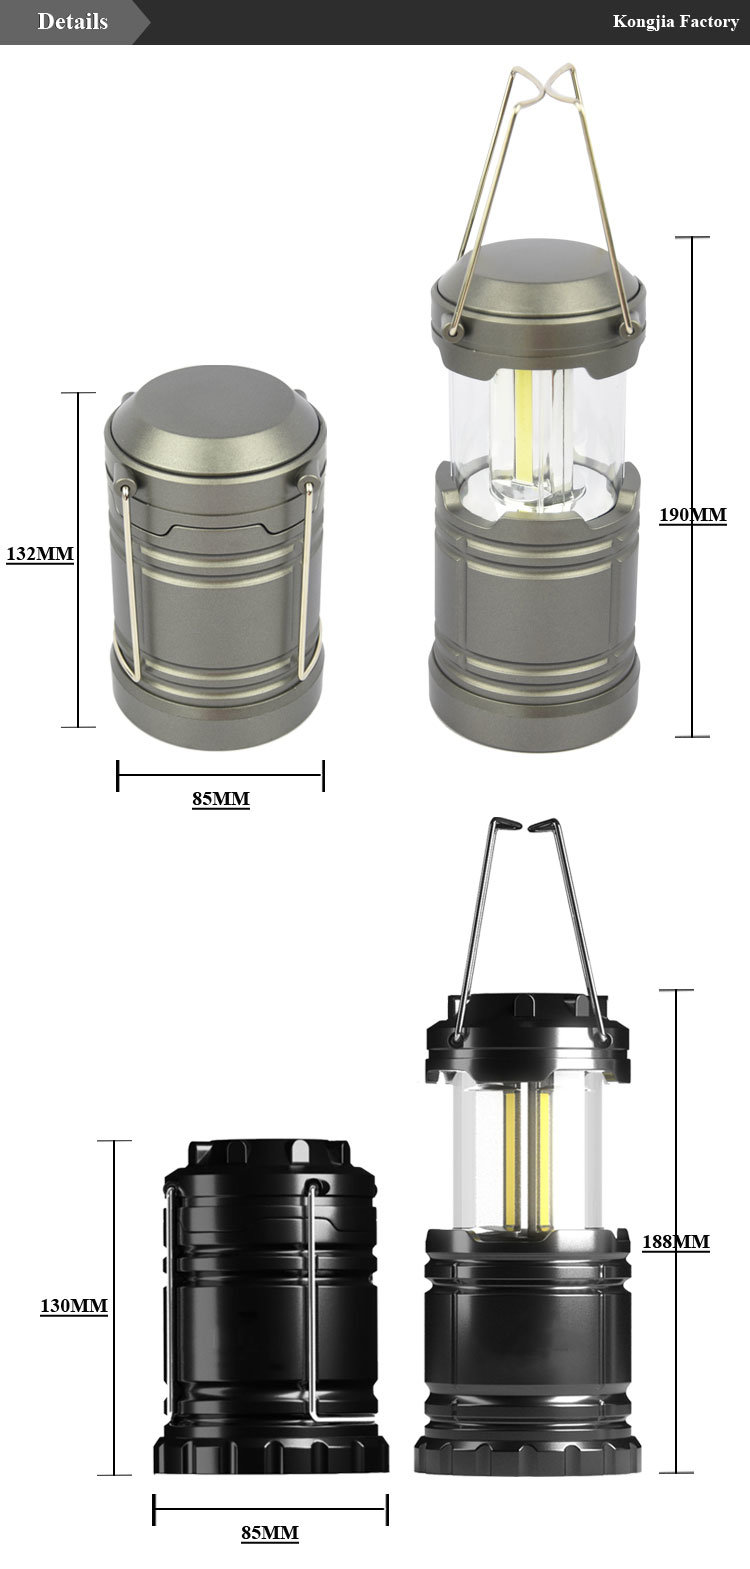 Most Powerful Daily Waterproof Camping Lantern LED Outdoor Lamp for Hiking